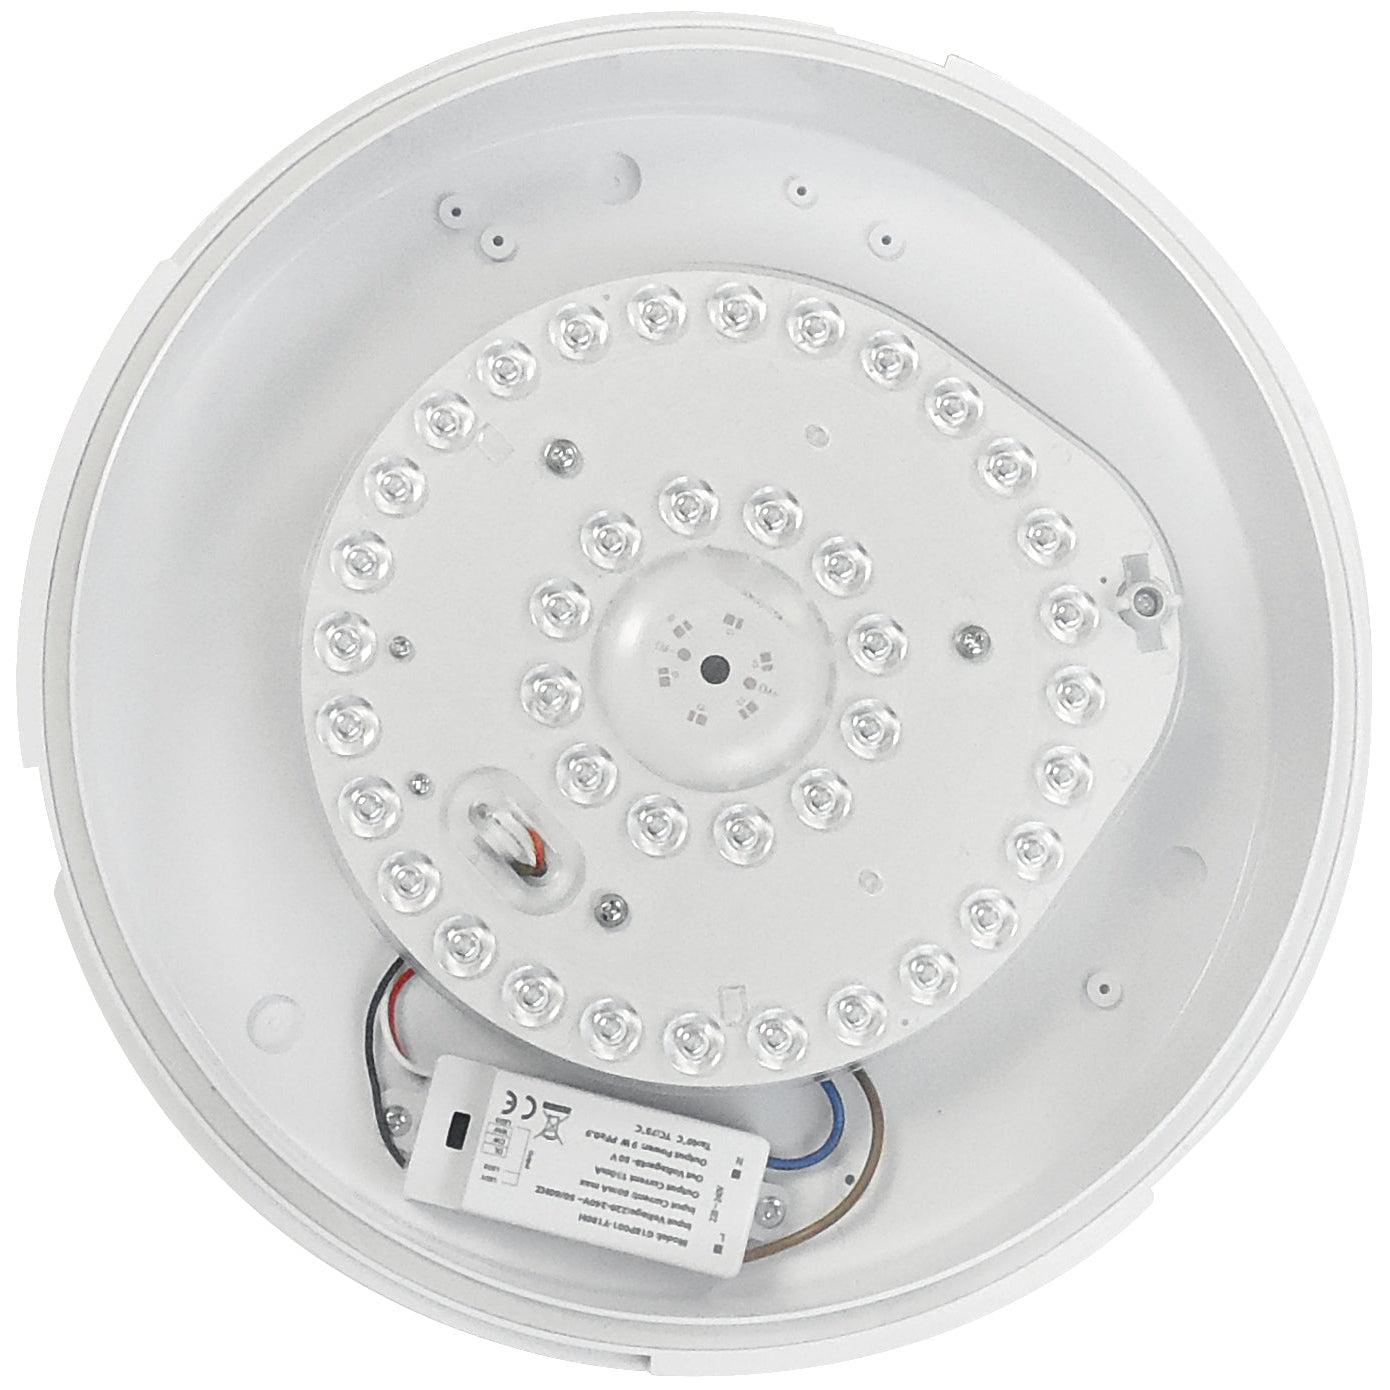 Eterna KCIRSTD 14W CT Selectable Circular LED Ceiling/Wall Light White